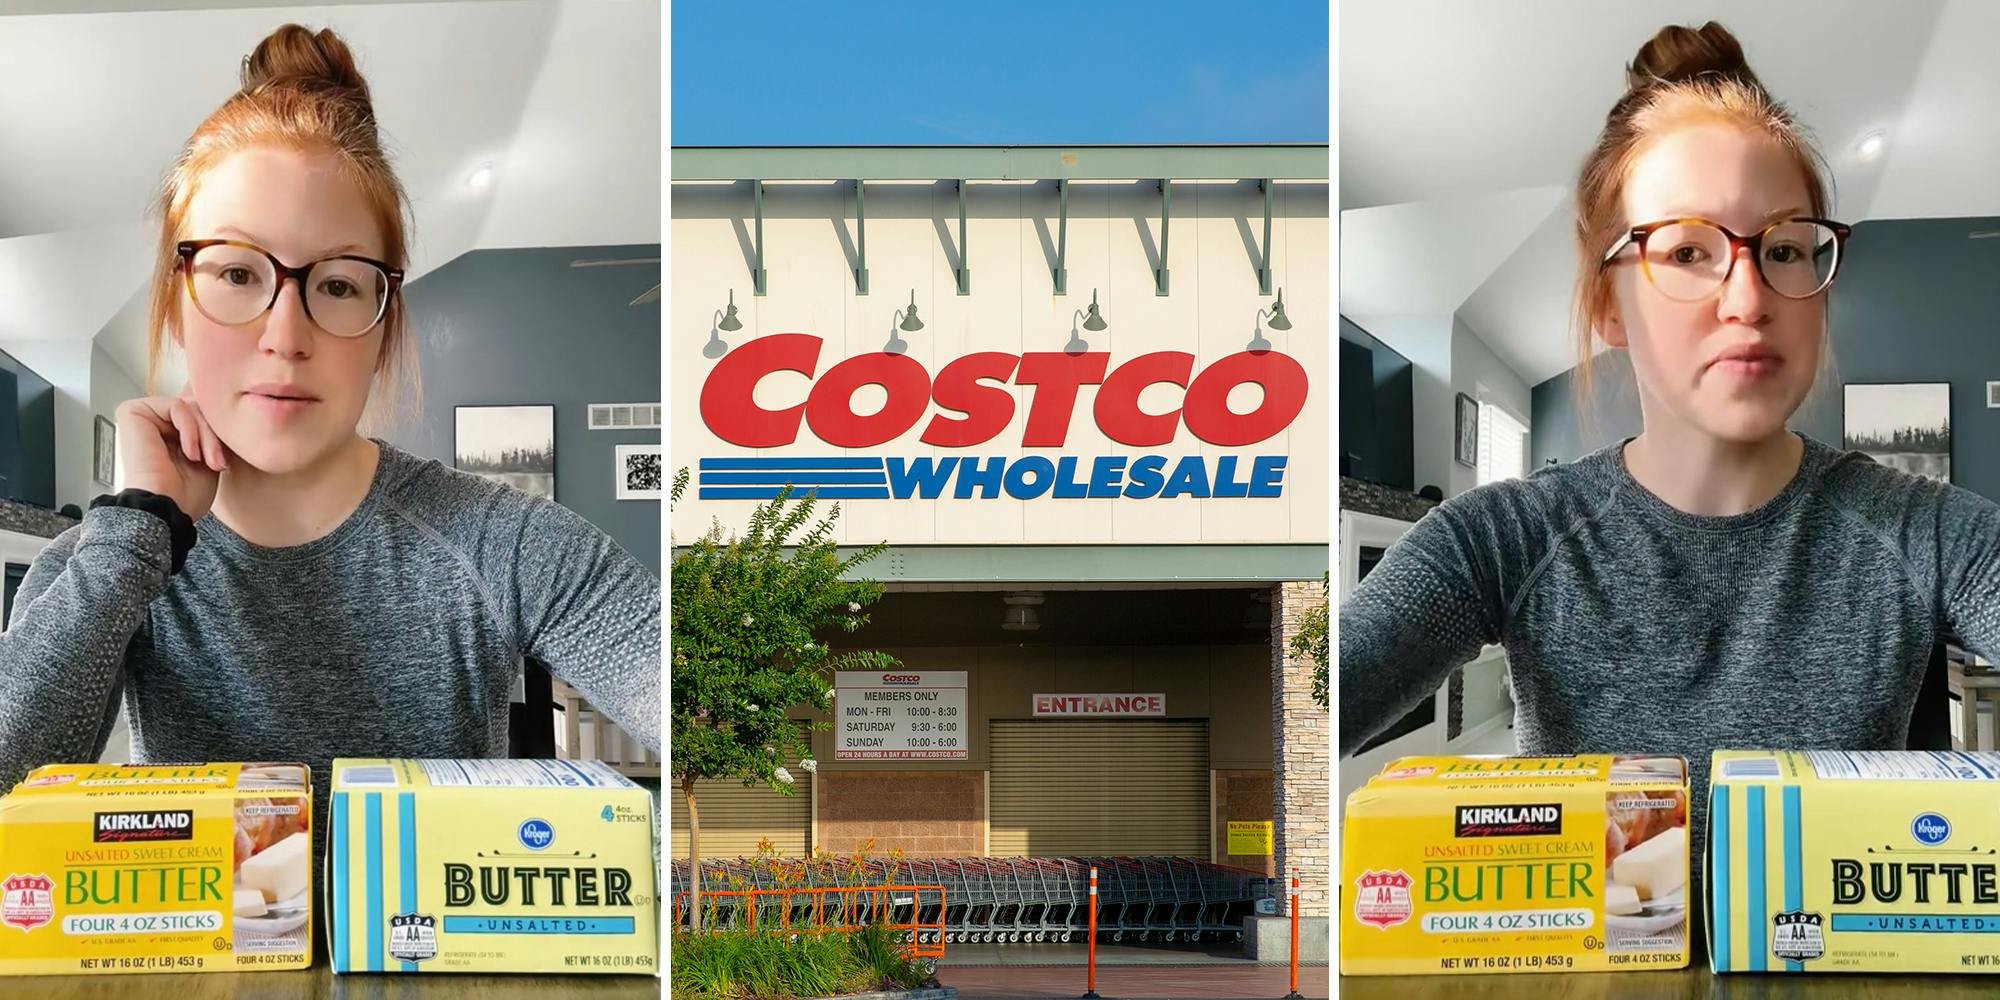 'I've been experiencing all sorts of sudden trouble': Bakers say Costco Kirkland butter changed dramatically. It's causing problems